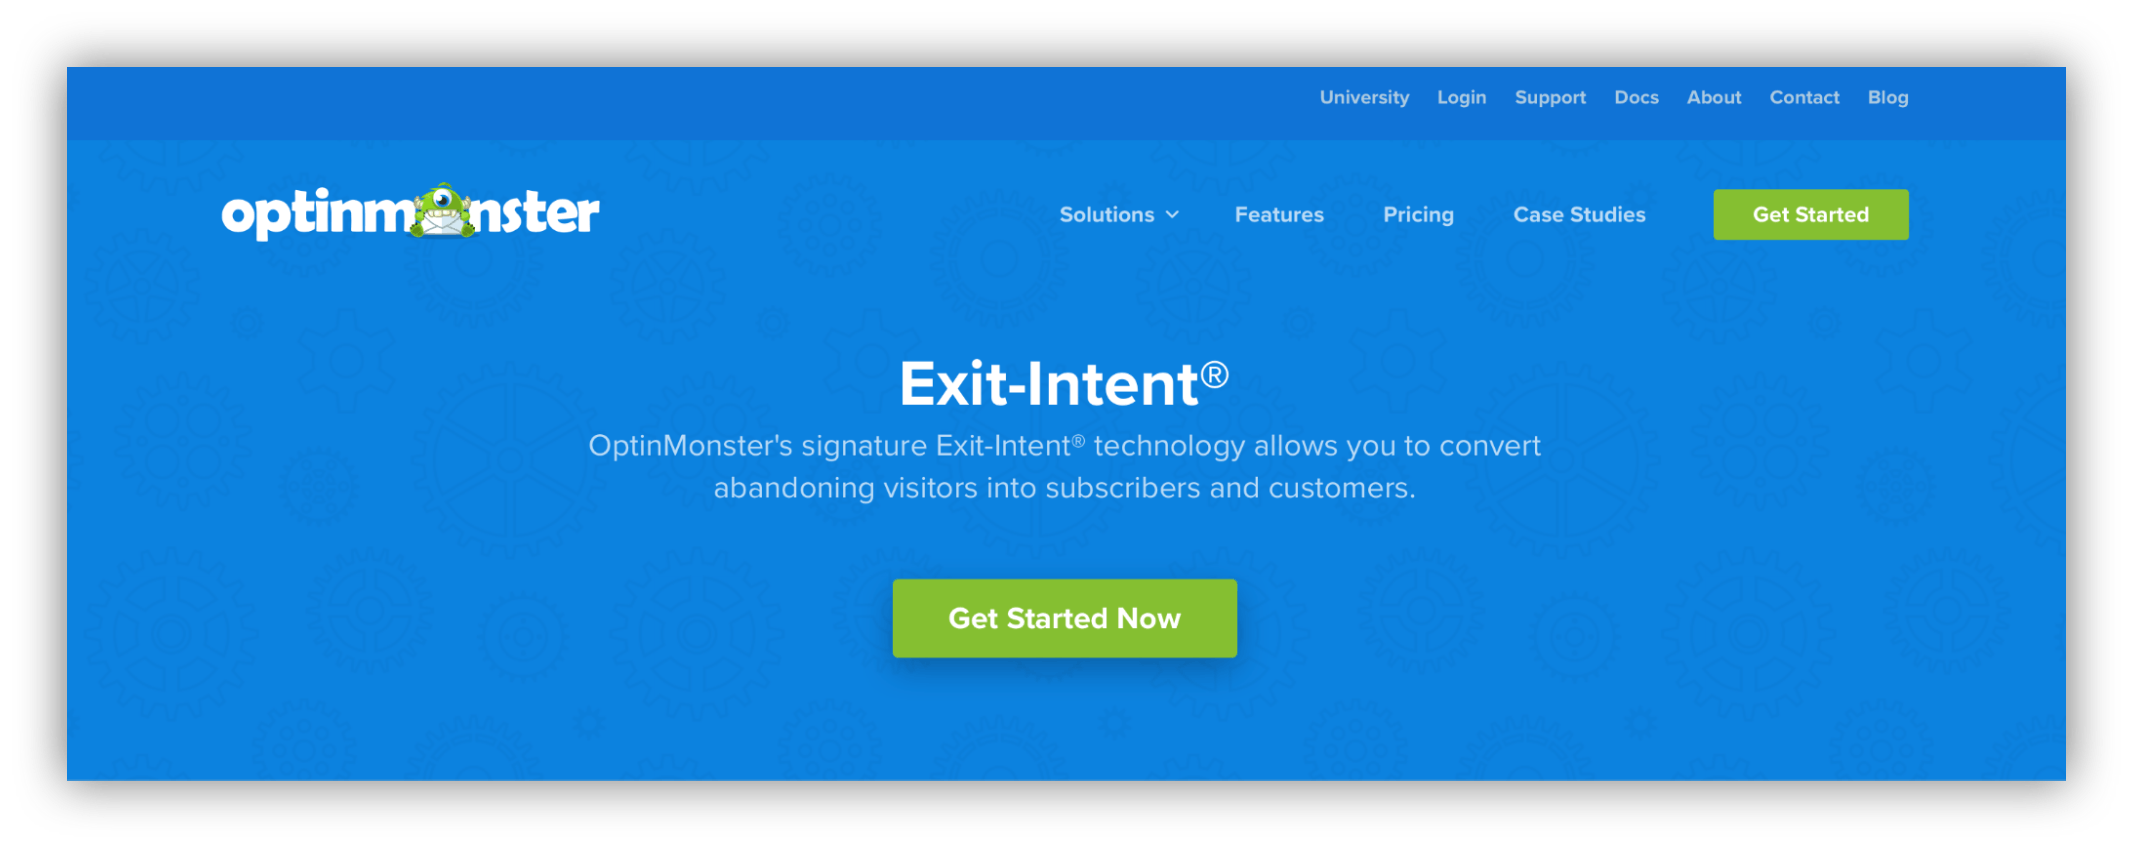 OptinMonster Exit-Intent landing page 